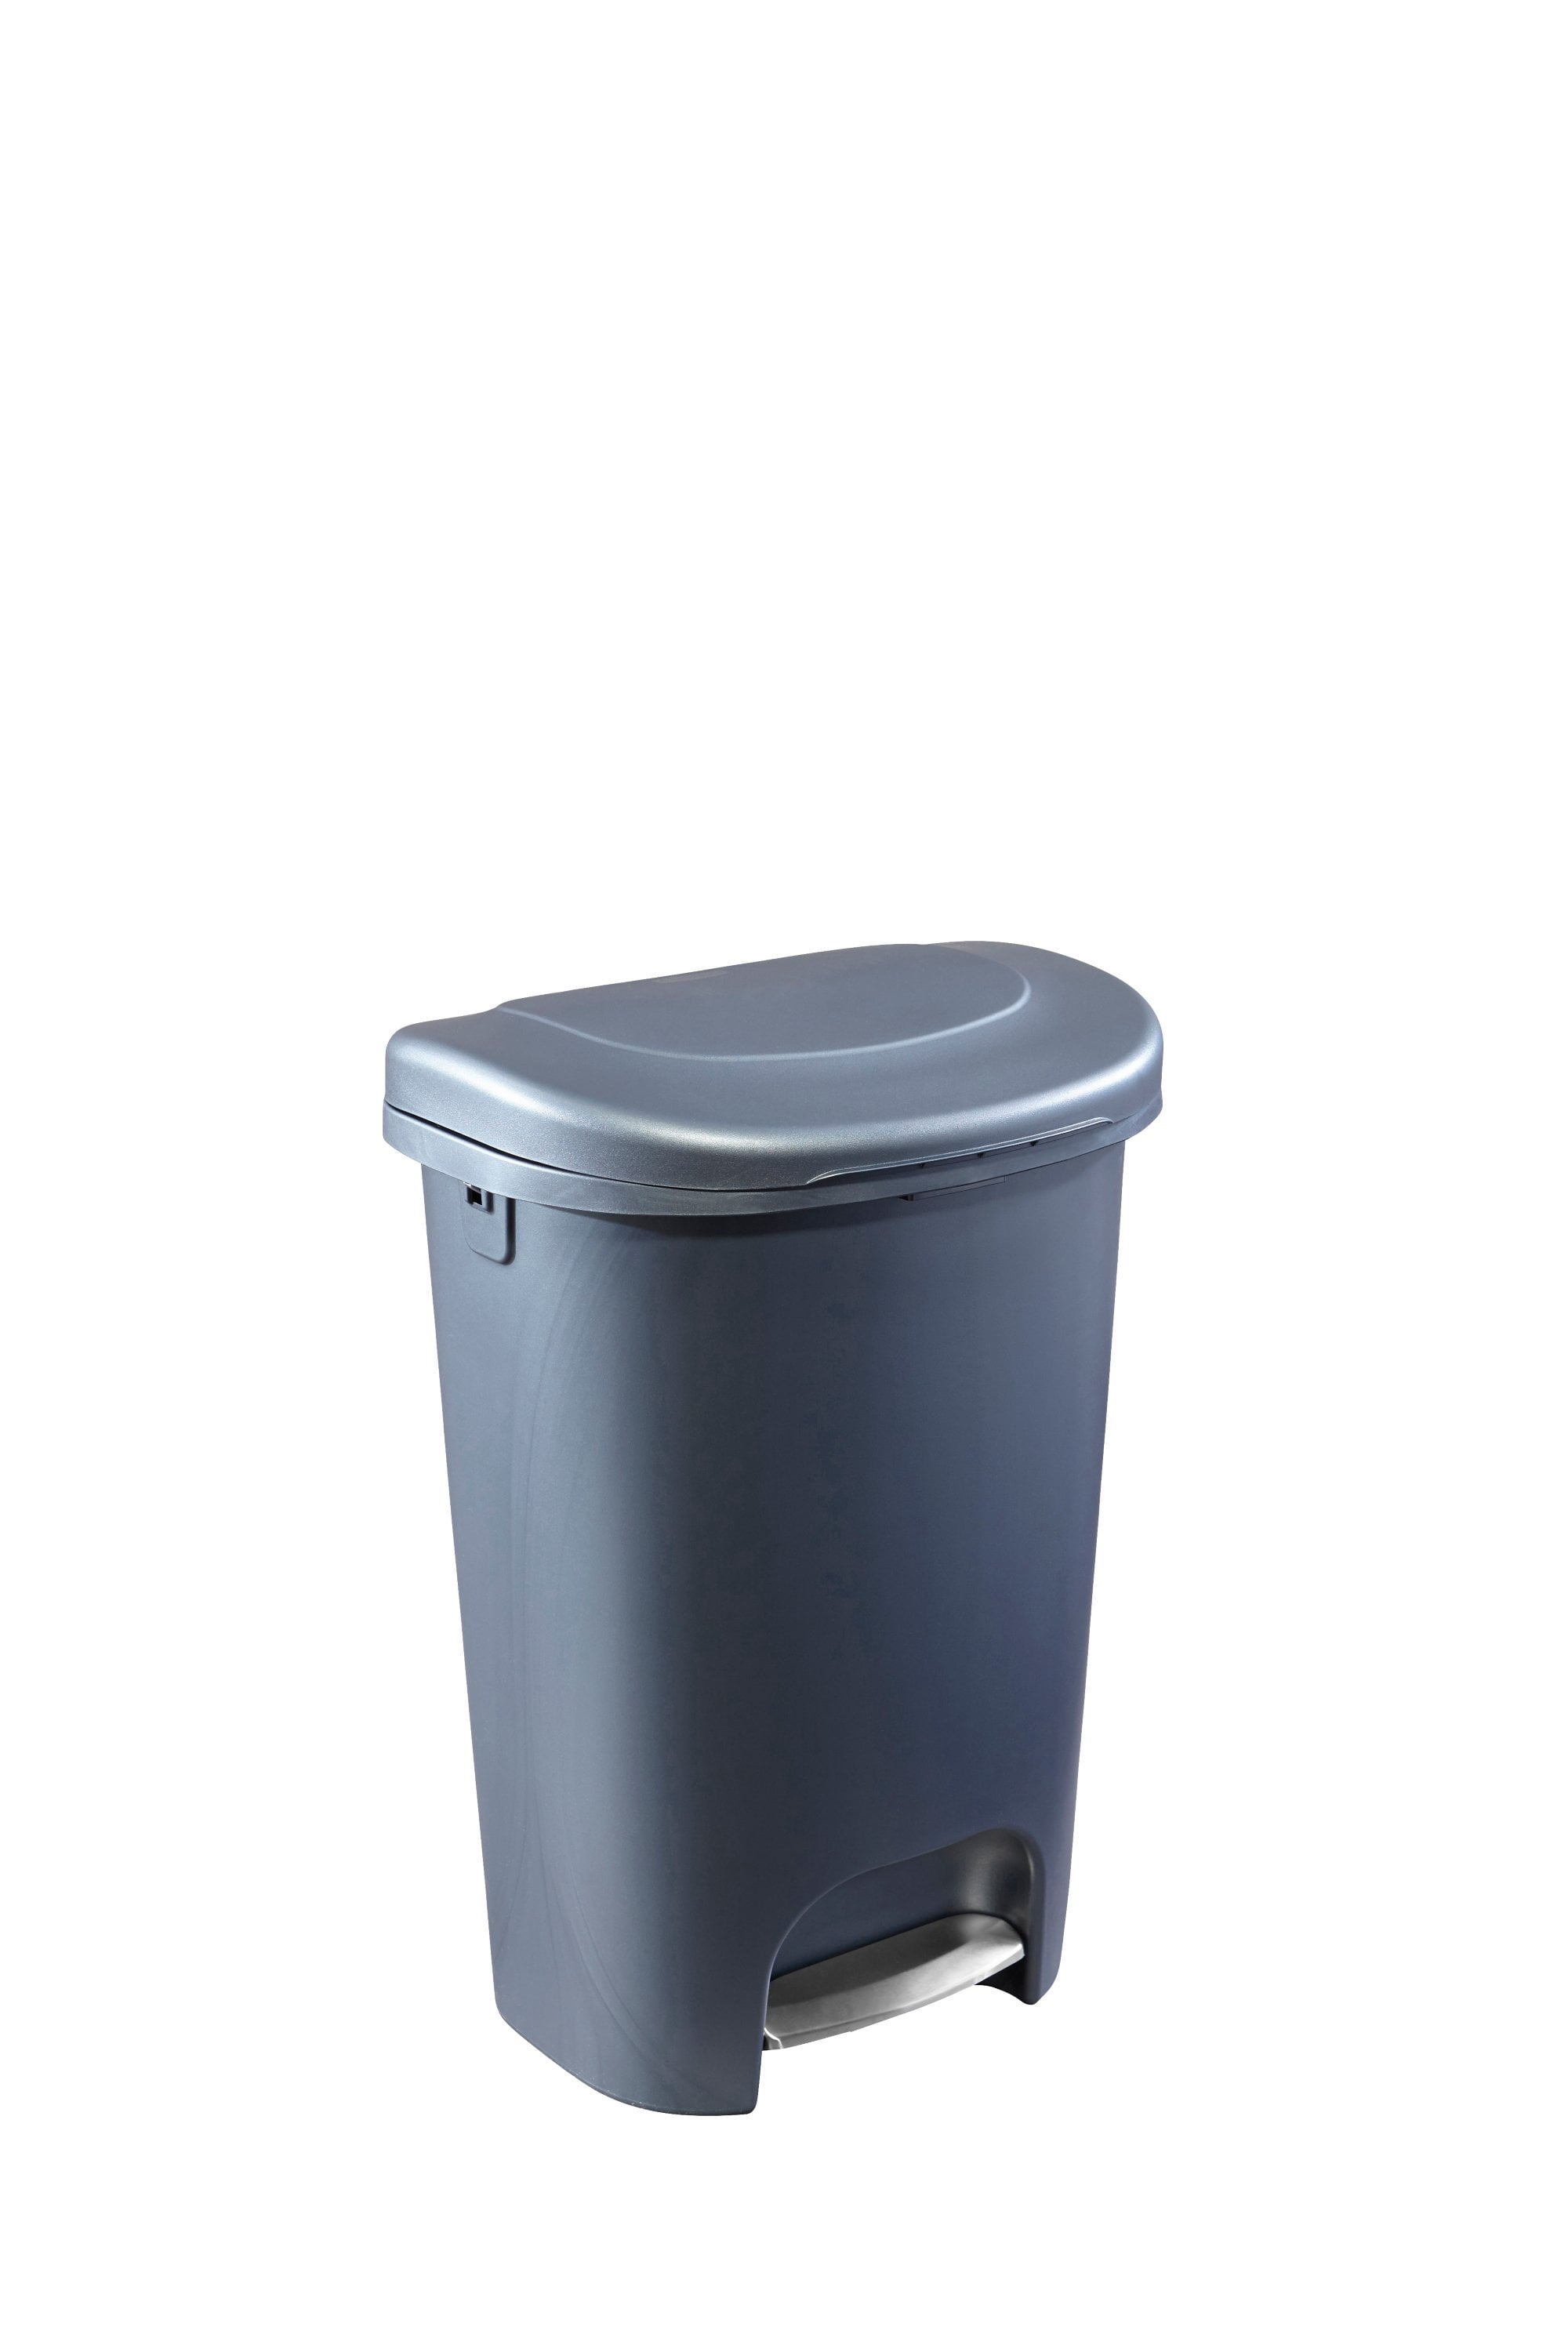 Rubbermaid 13 Gallon Trash Can, Premium Slow Close Kitchen Step On Trash Can,  Gray 